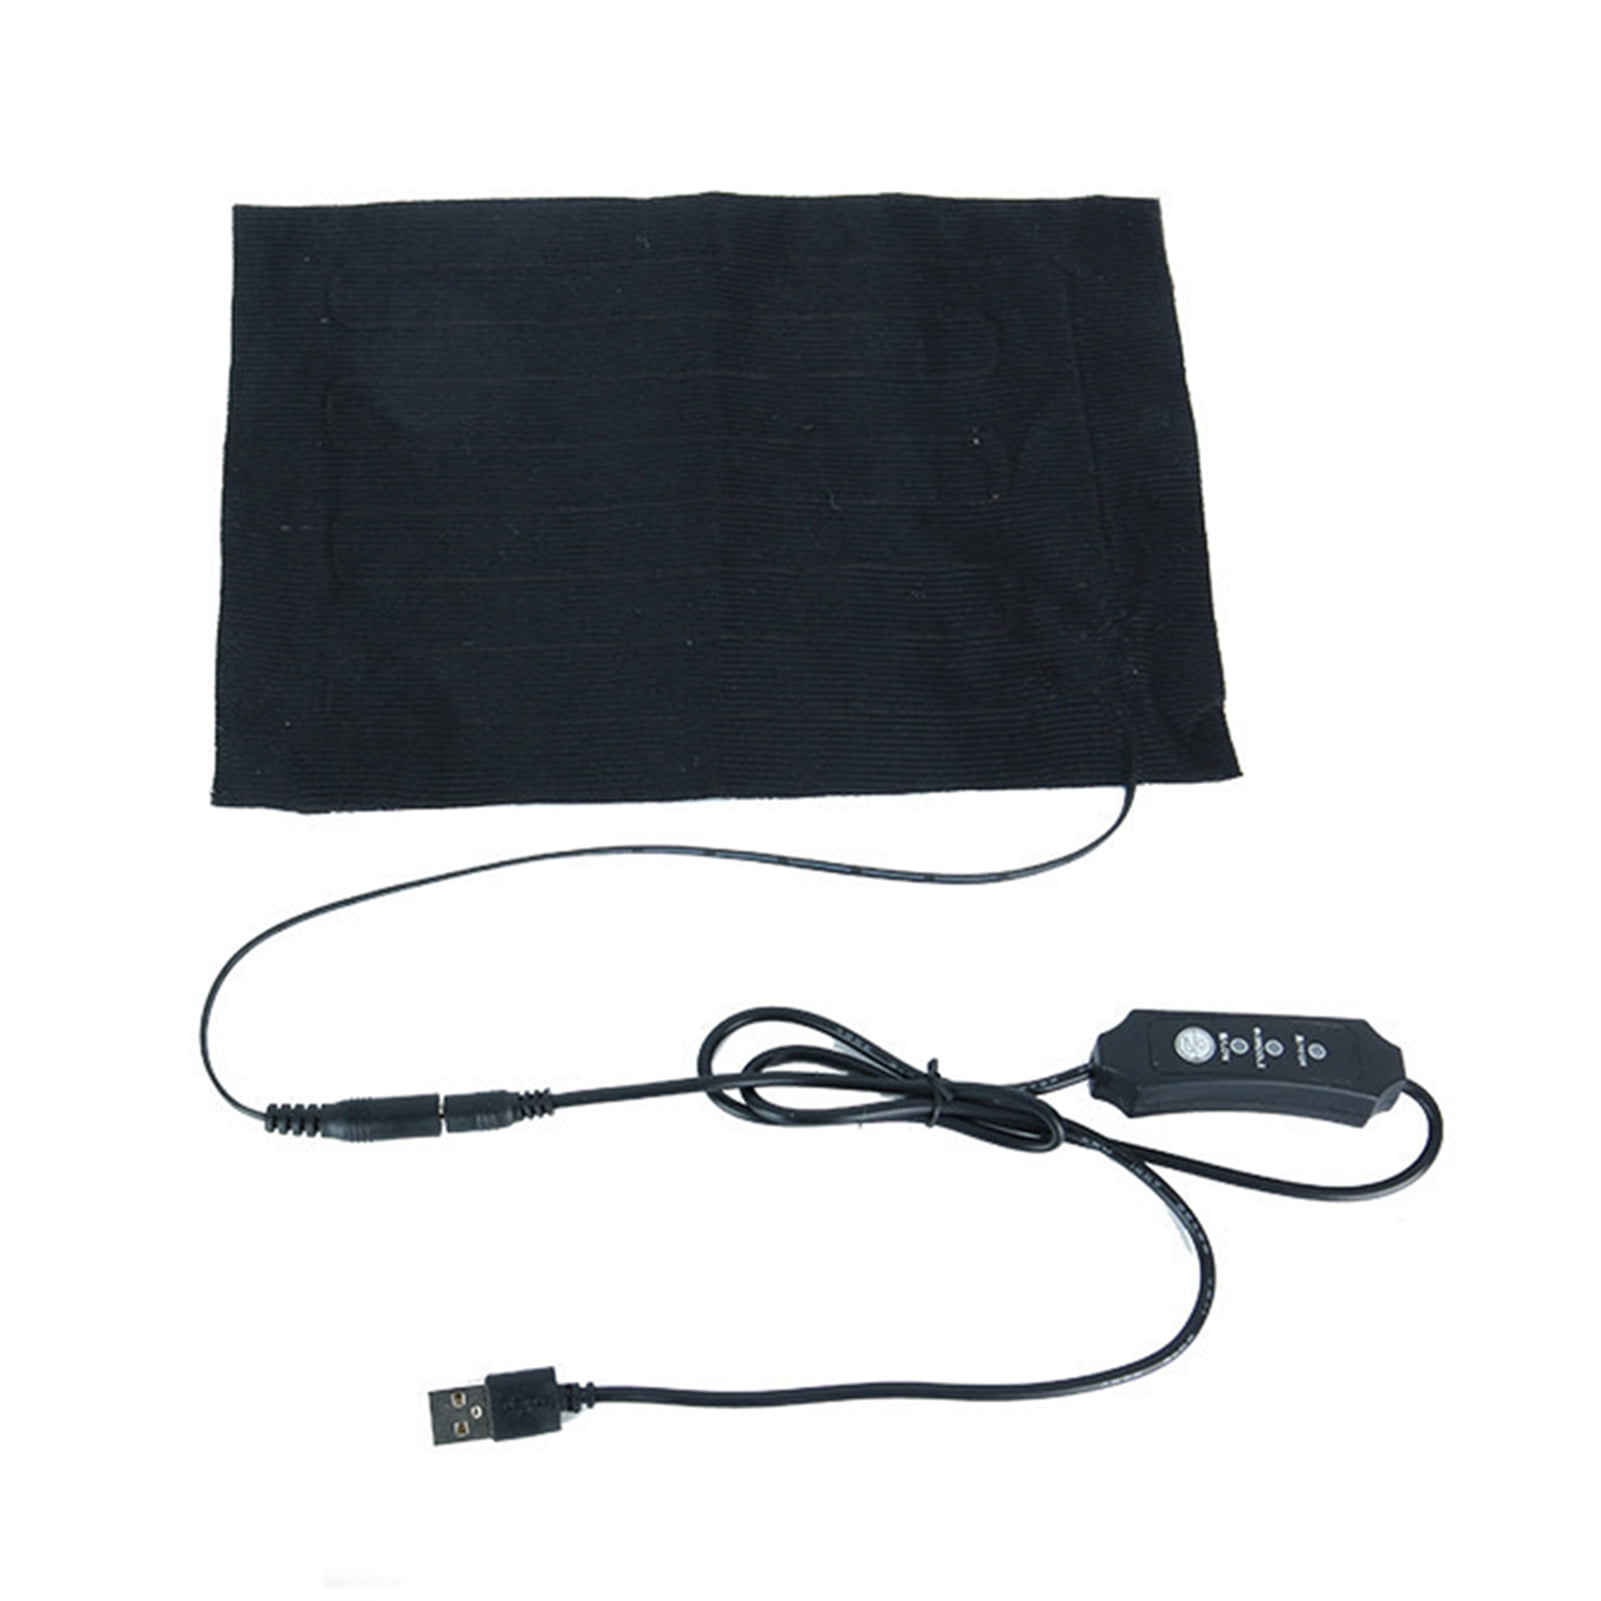 Travelwant Electrical Heating Pad for Cramps and Back Pain Relief 鈥婬igh ...